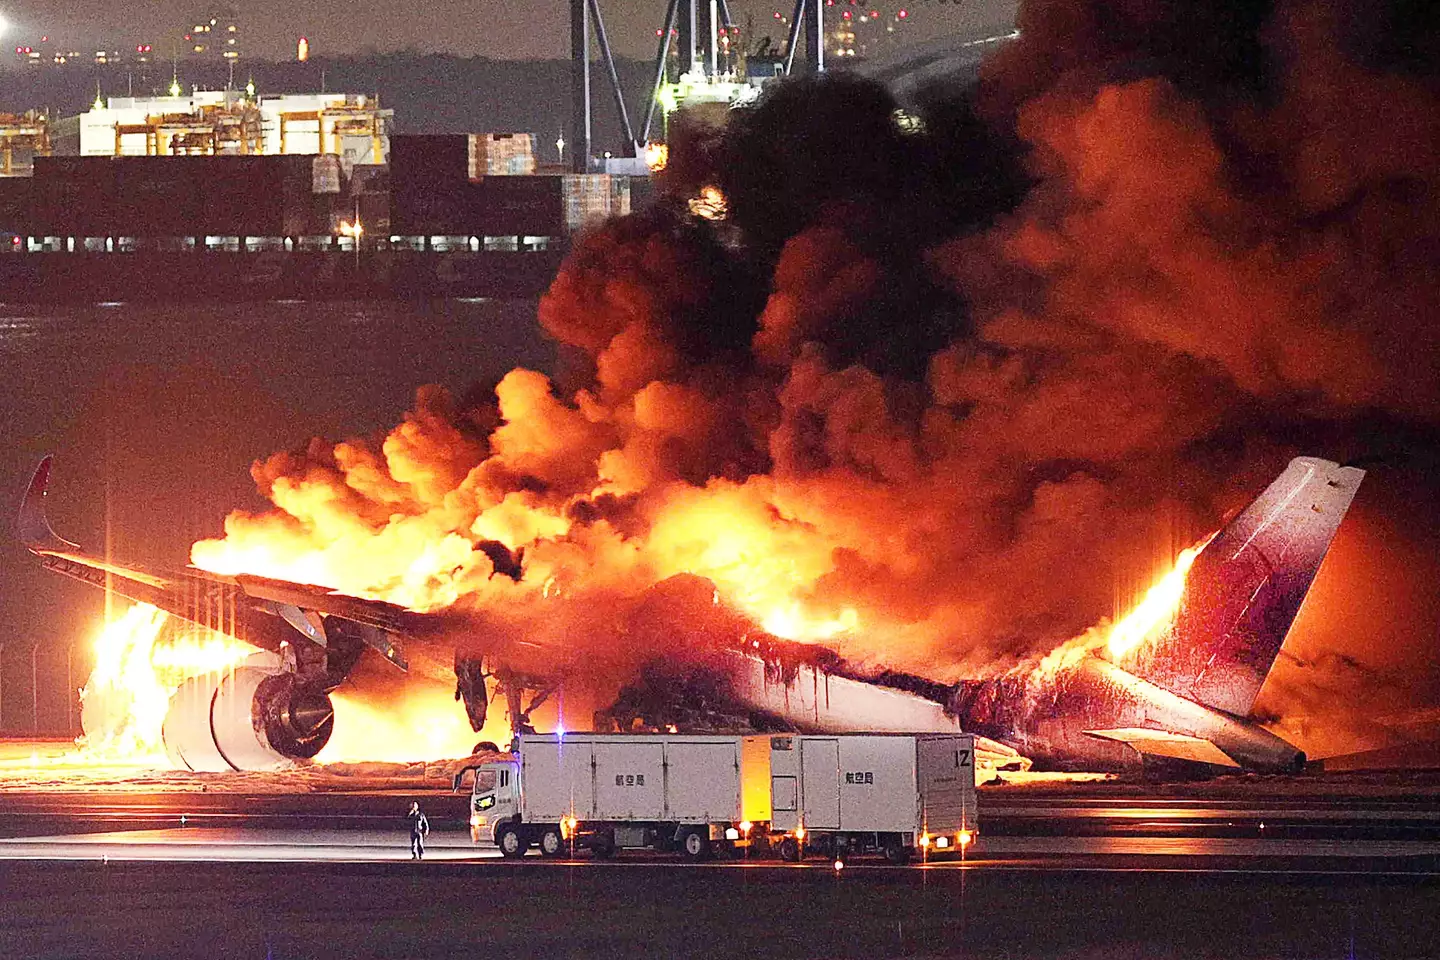 379 passengers and crew were evacuated from the plane as it caught fire.